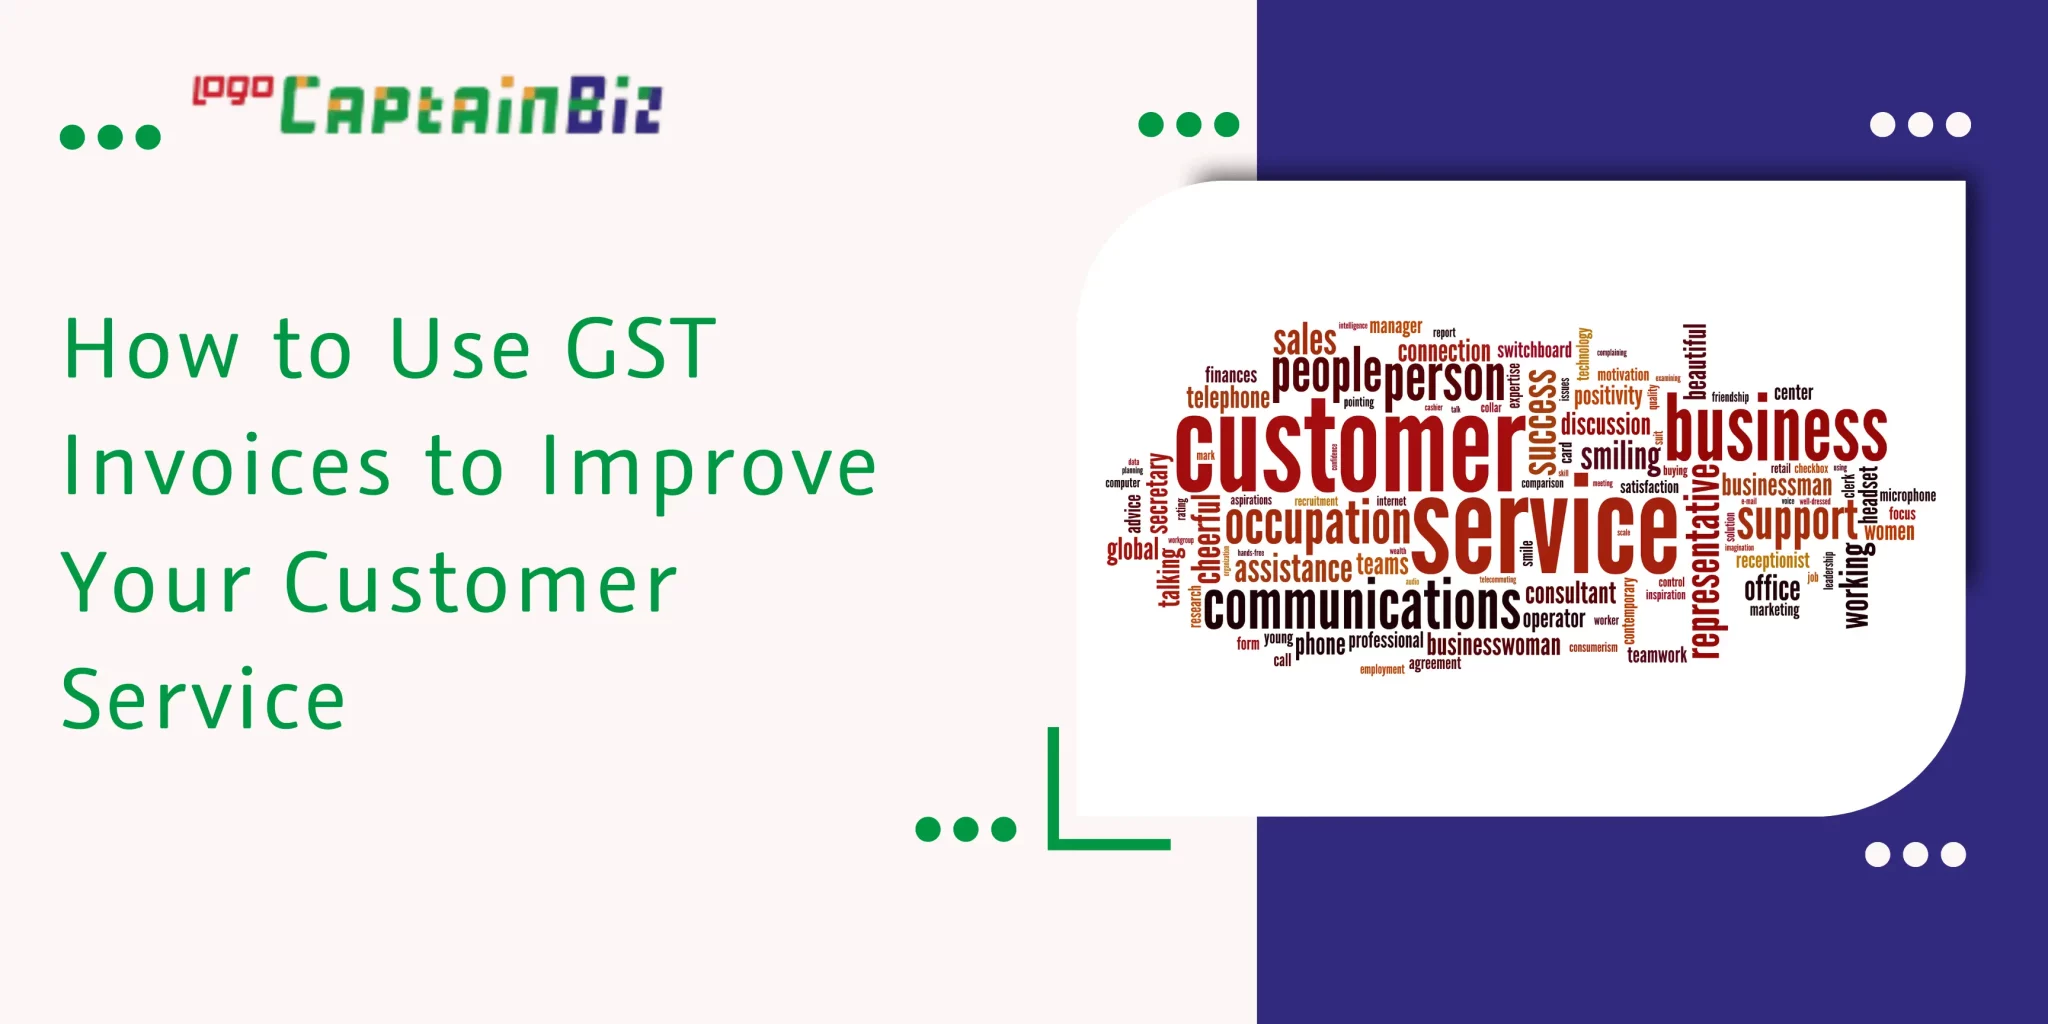 captainbiz how to use gst invoices to improve your customer service